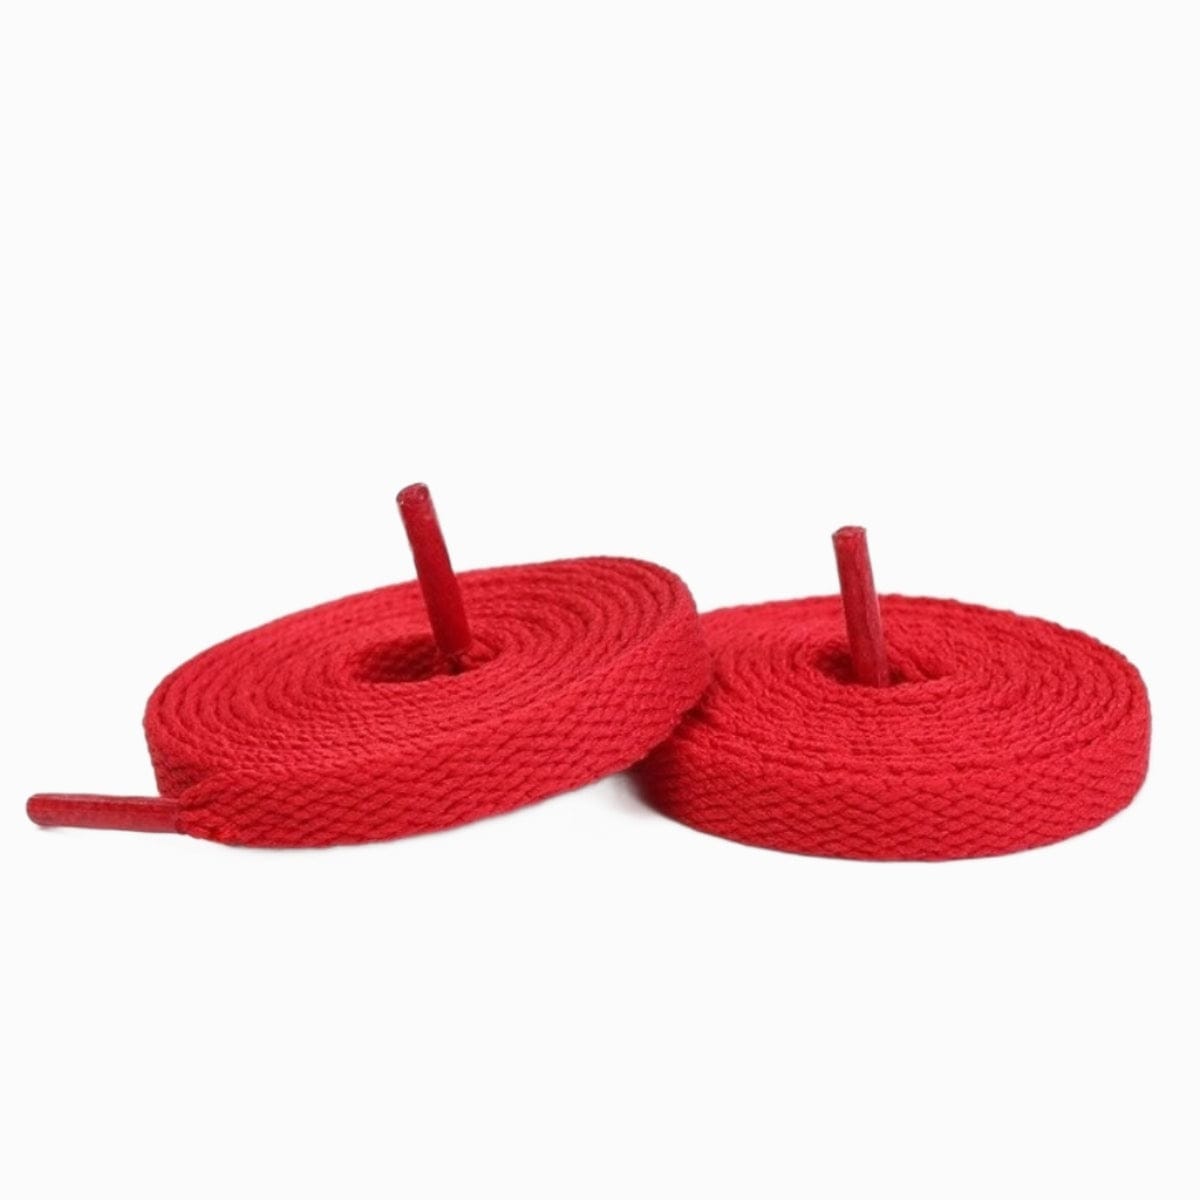 Red Replacement Adidas Shoe Laces for Adidas Handball Spezial Sneakers by Kicks Shoelaces